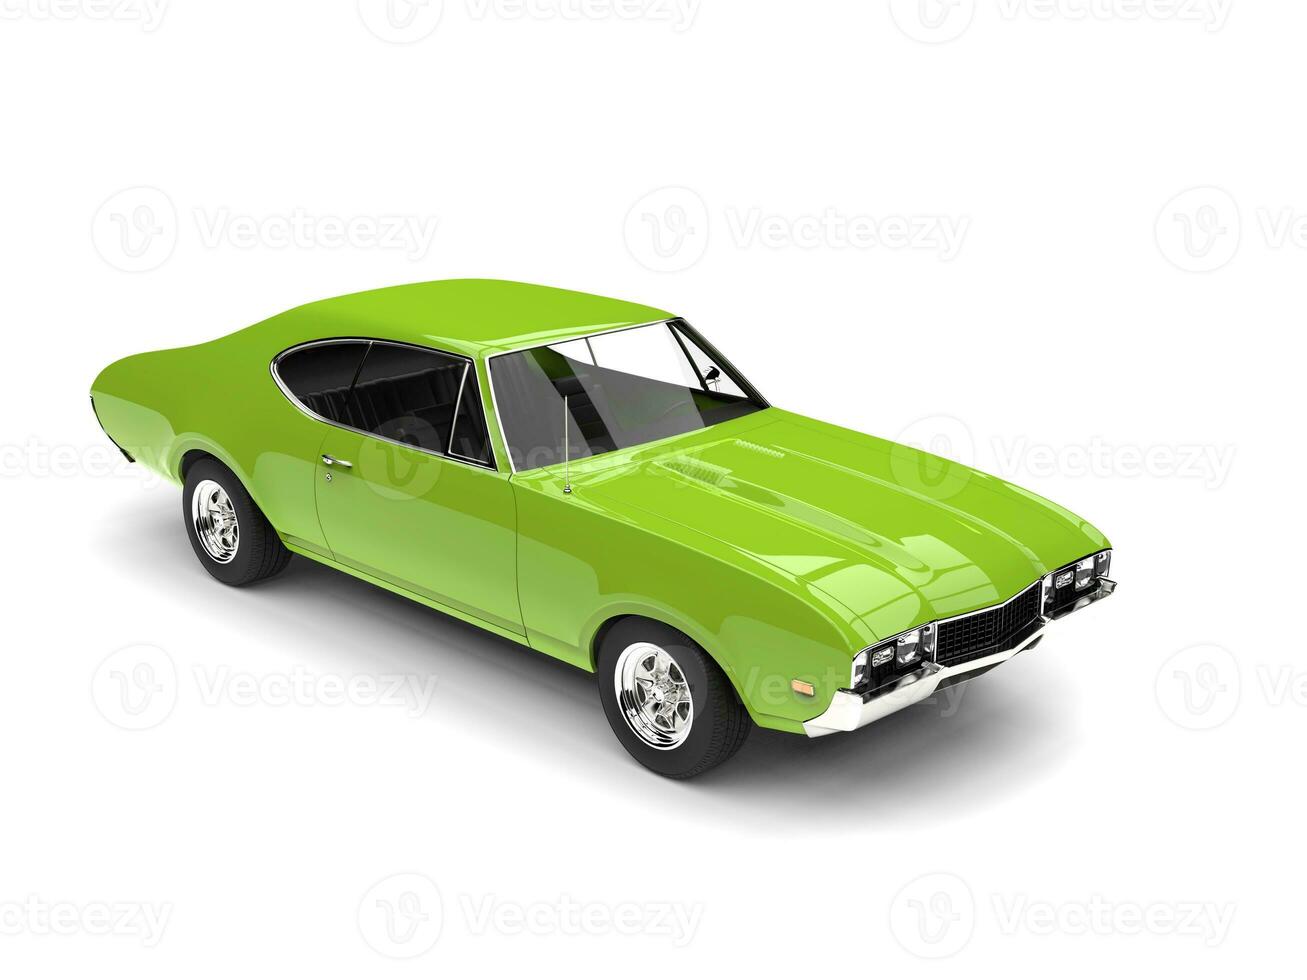 Bright lime green vintage restored muscle car - top down view photo